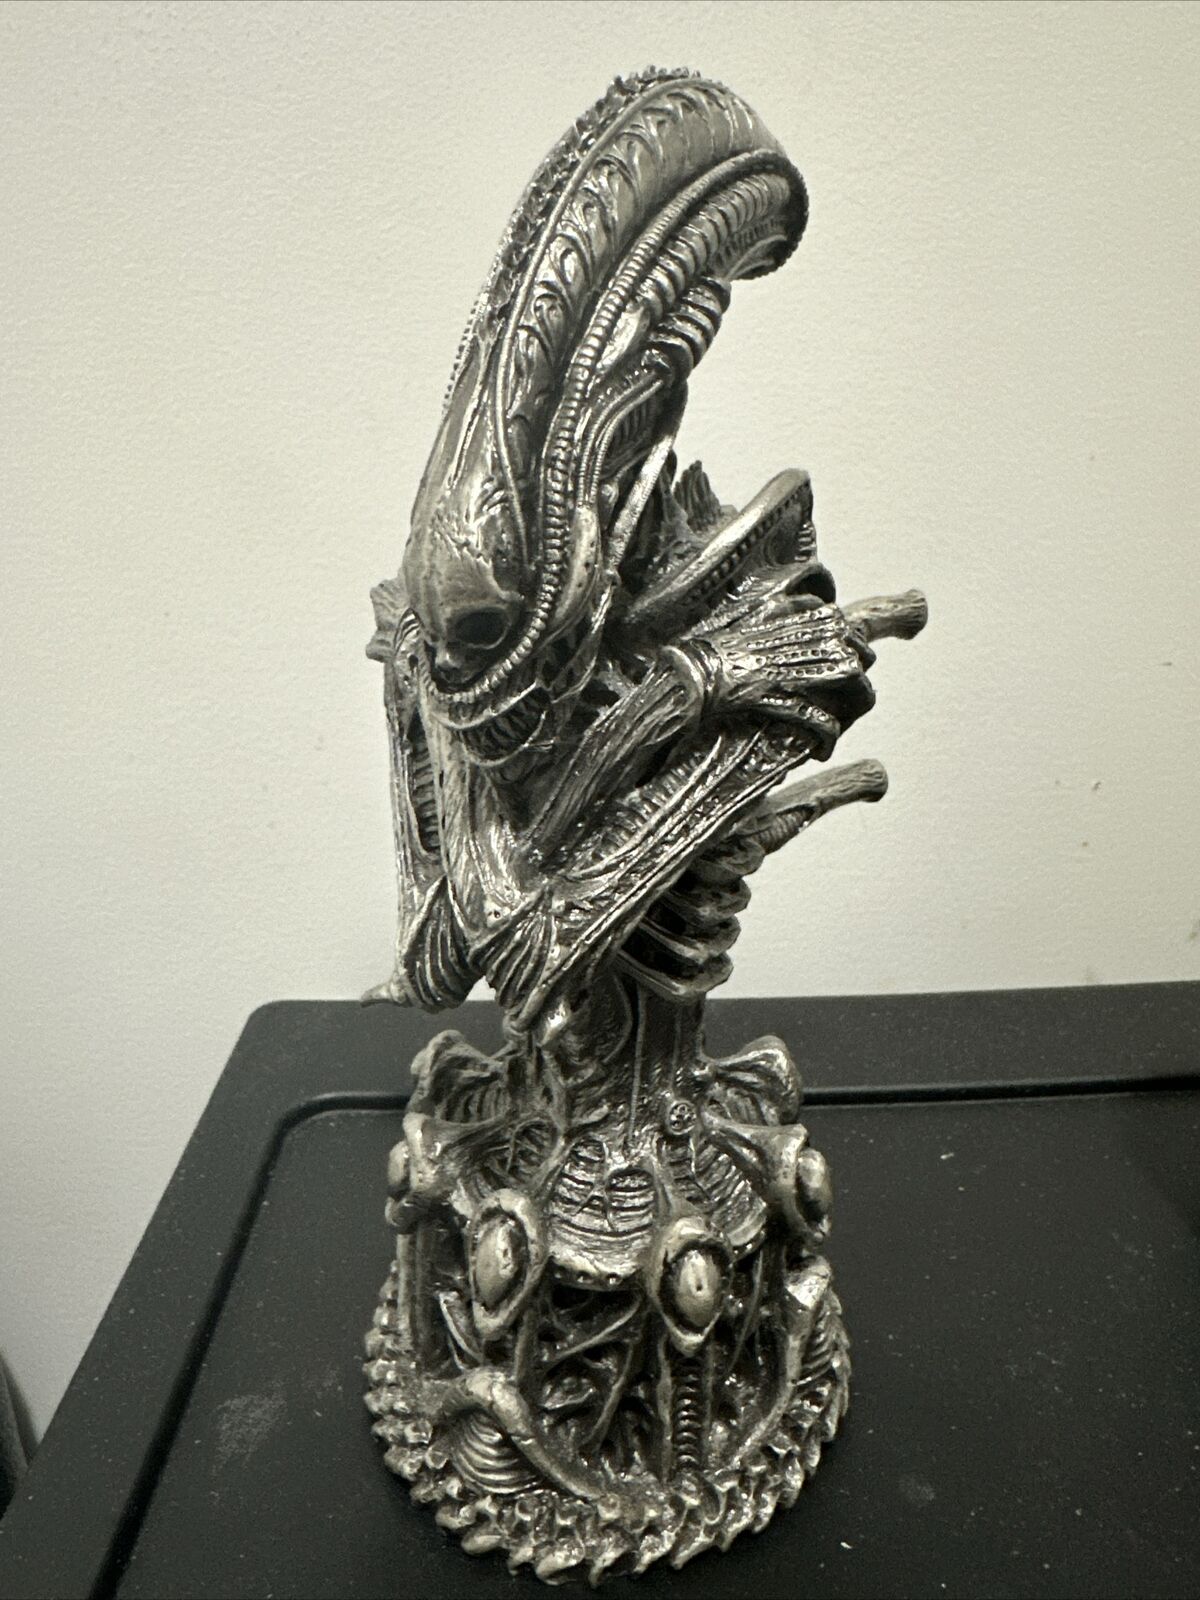 Alien Special Edition Exclusive Pewter Mini Bust by Palisades